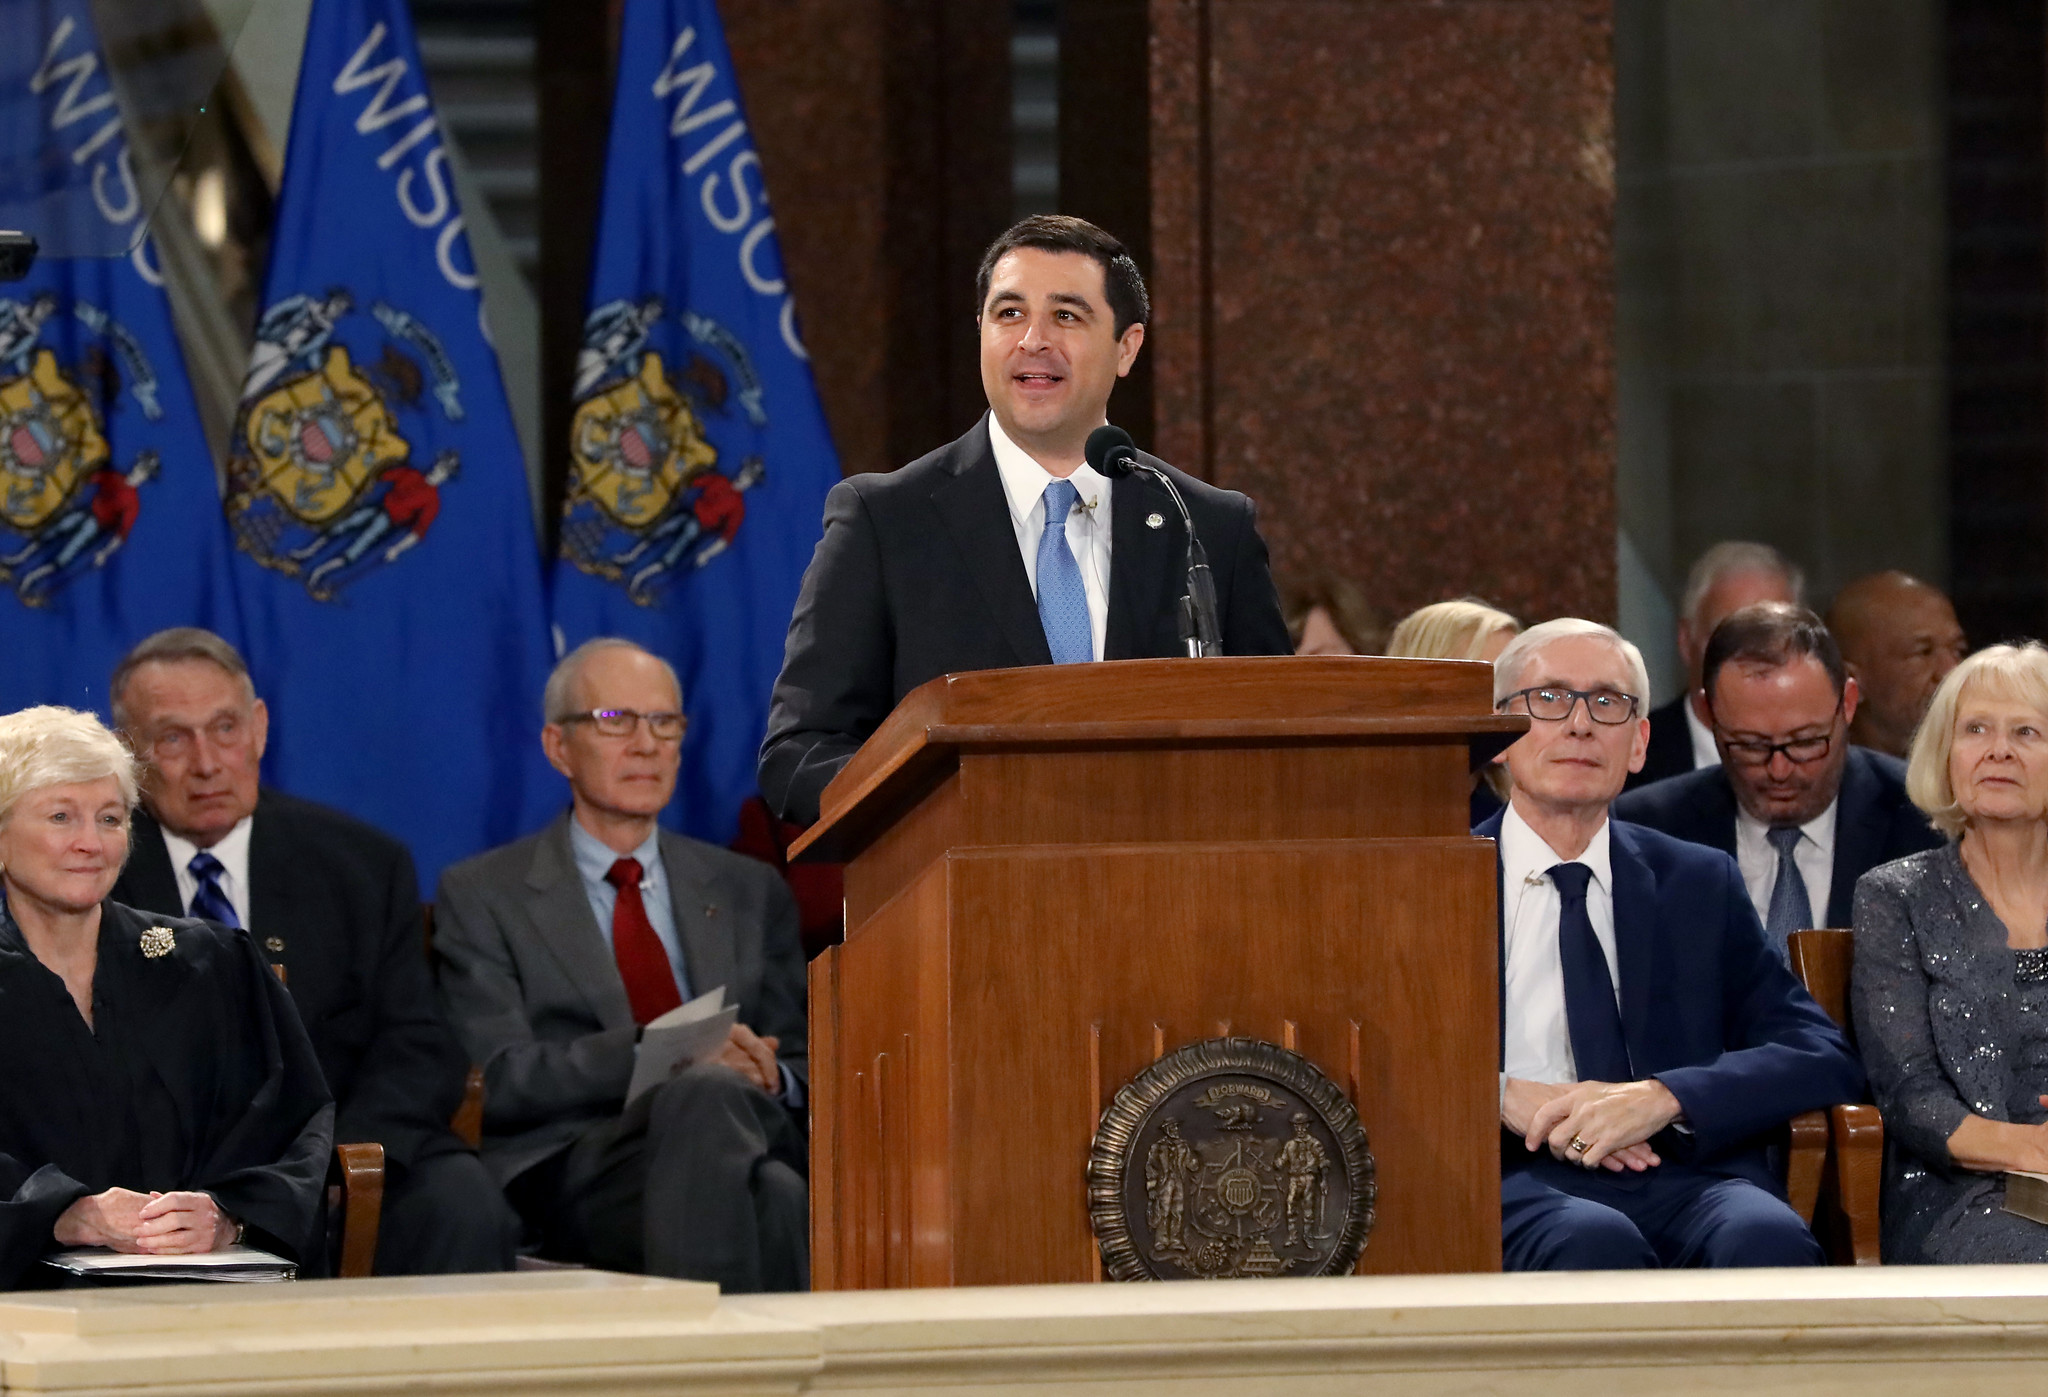 Attorney General Josh Kaul speaks at the inauguration ceremony at the Wisconsin State Capitol on Jan. 7, 2019.